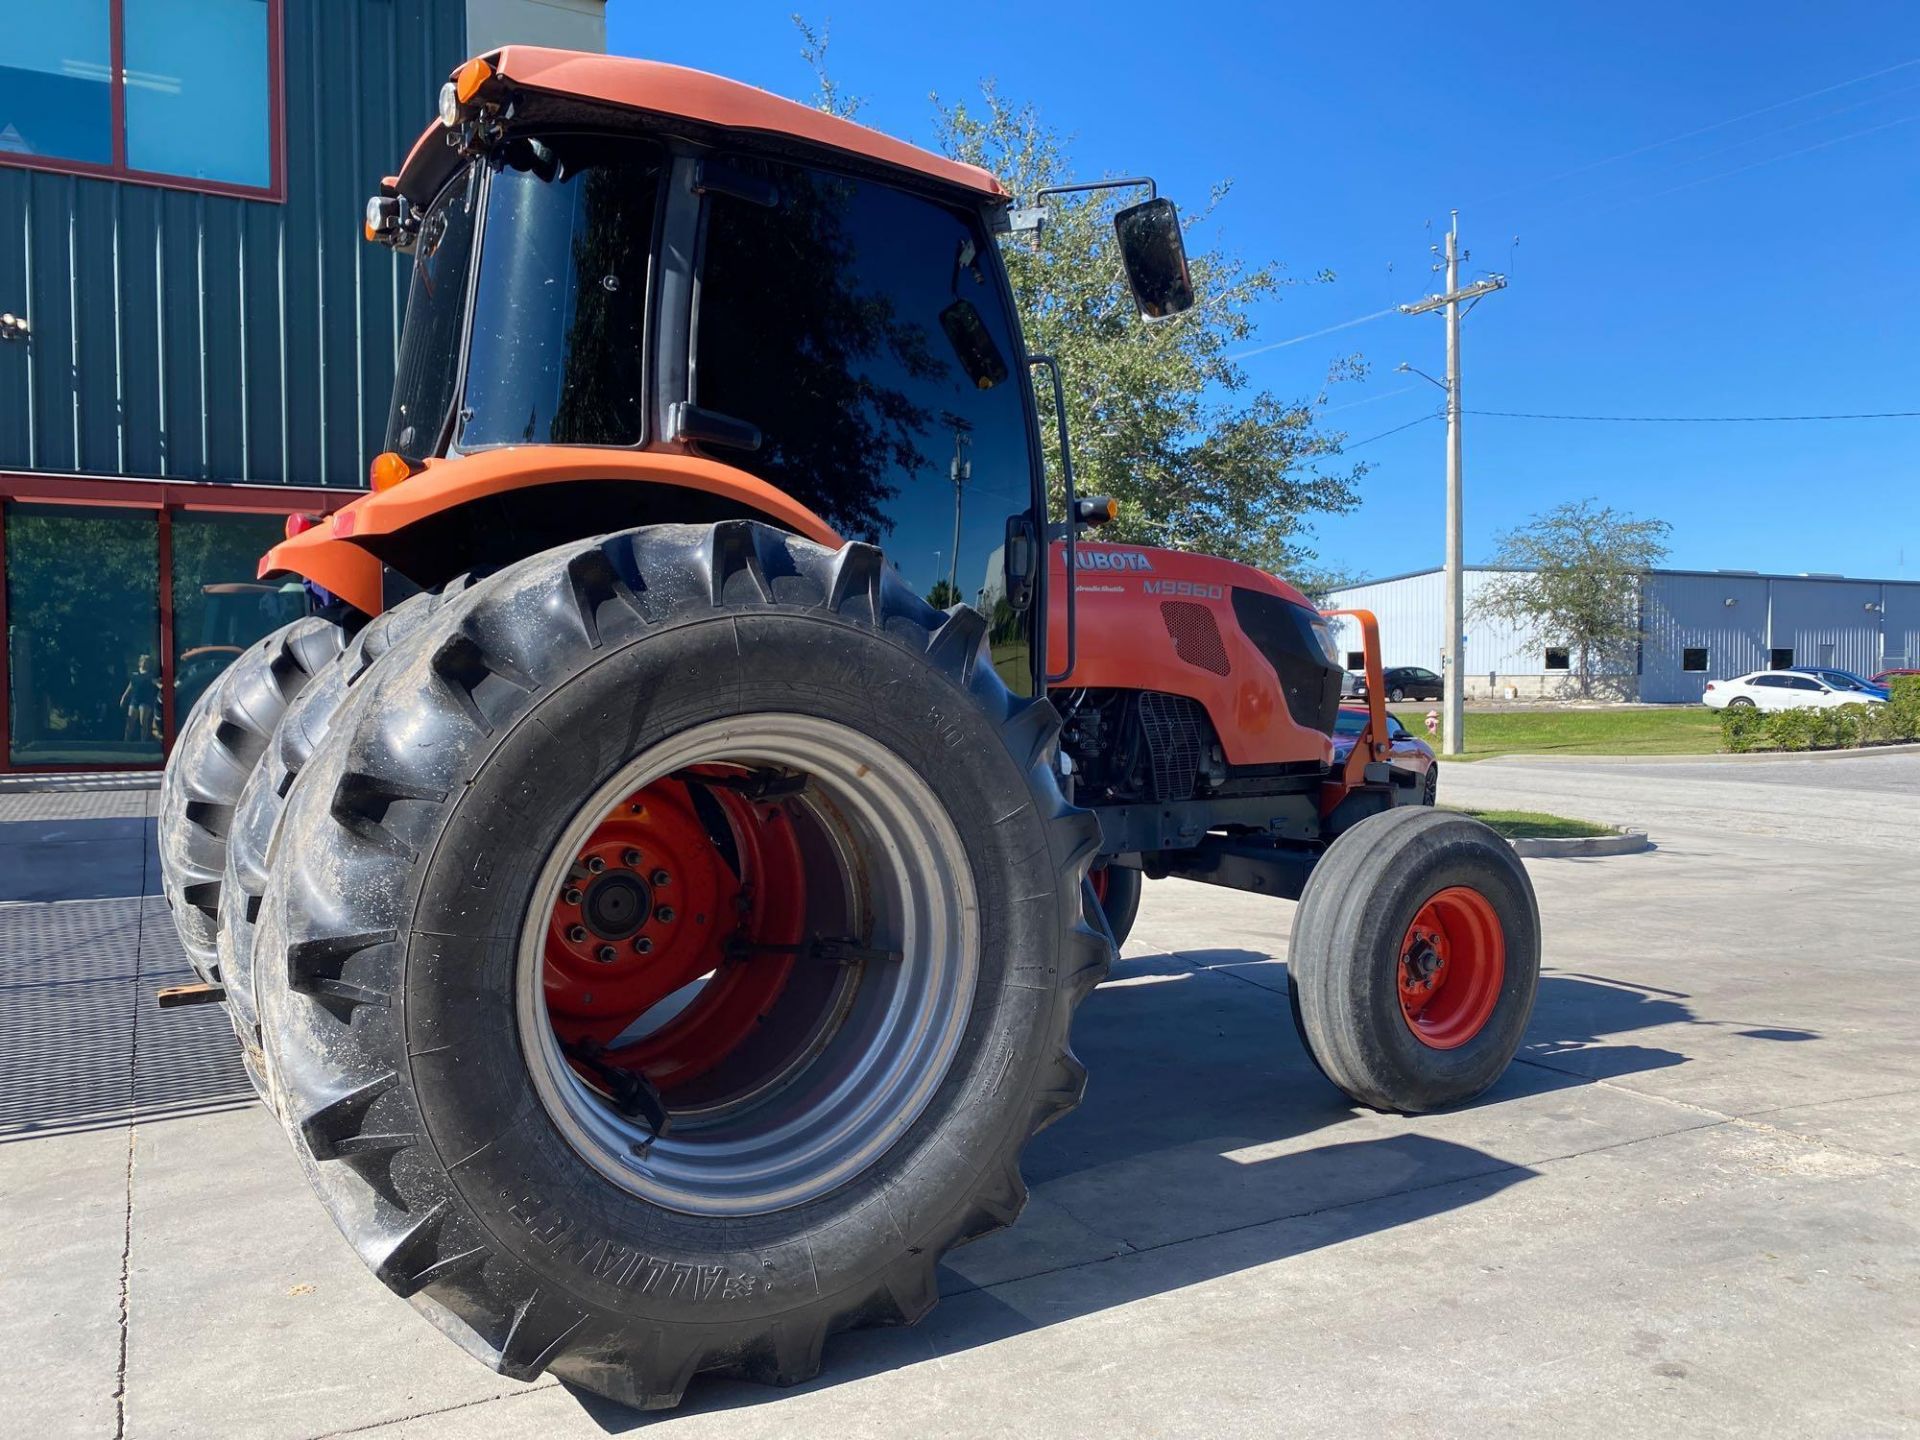 2012 KUBOTA M9960 DIESEL TRACTOR, DUAL REAR WHEELS, ENCLOSED CAB, HEAT, A/C BLOWS COLD - Image 14 of 44